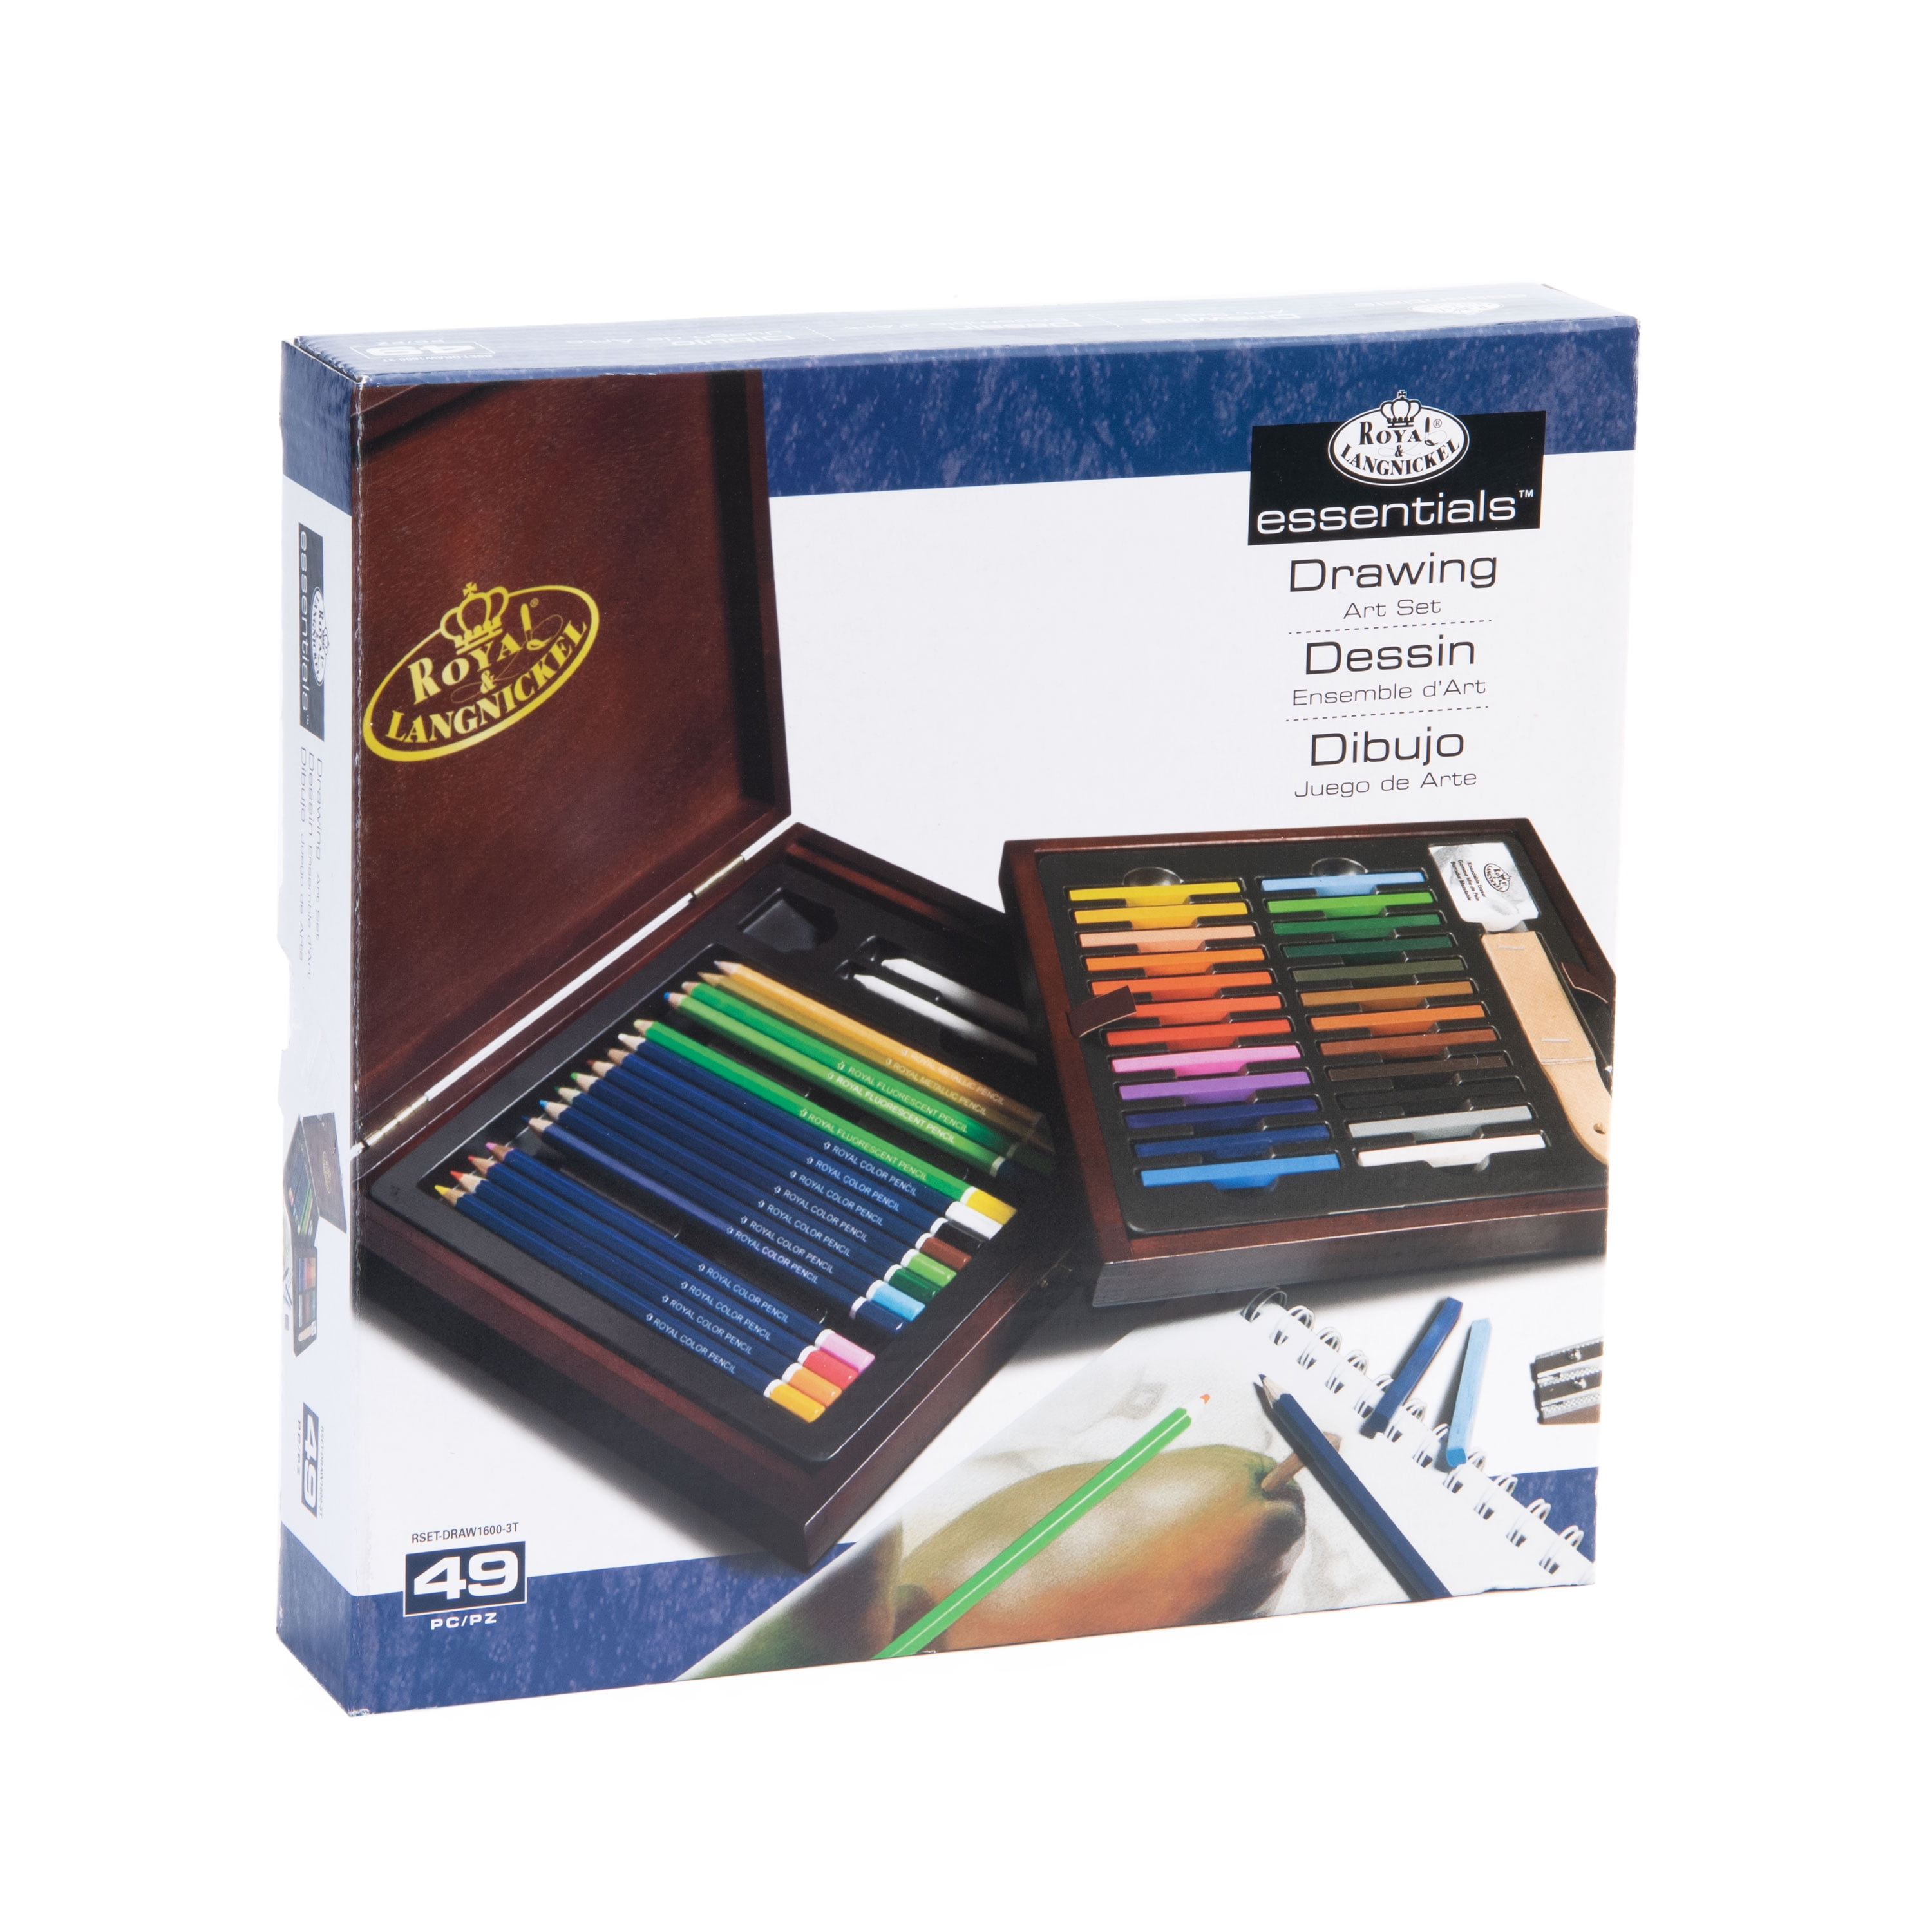 Castle Art Supplies Gold Standard 120 Coloring Pencils Set | Quality Oil-Based Colored Cores Stay Sharper, Tougher Against Breakage | for Adult